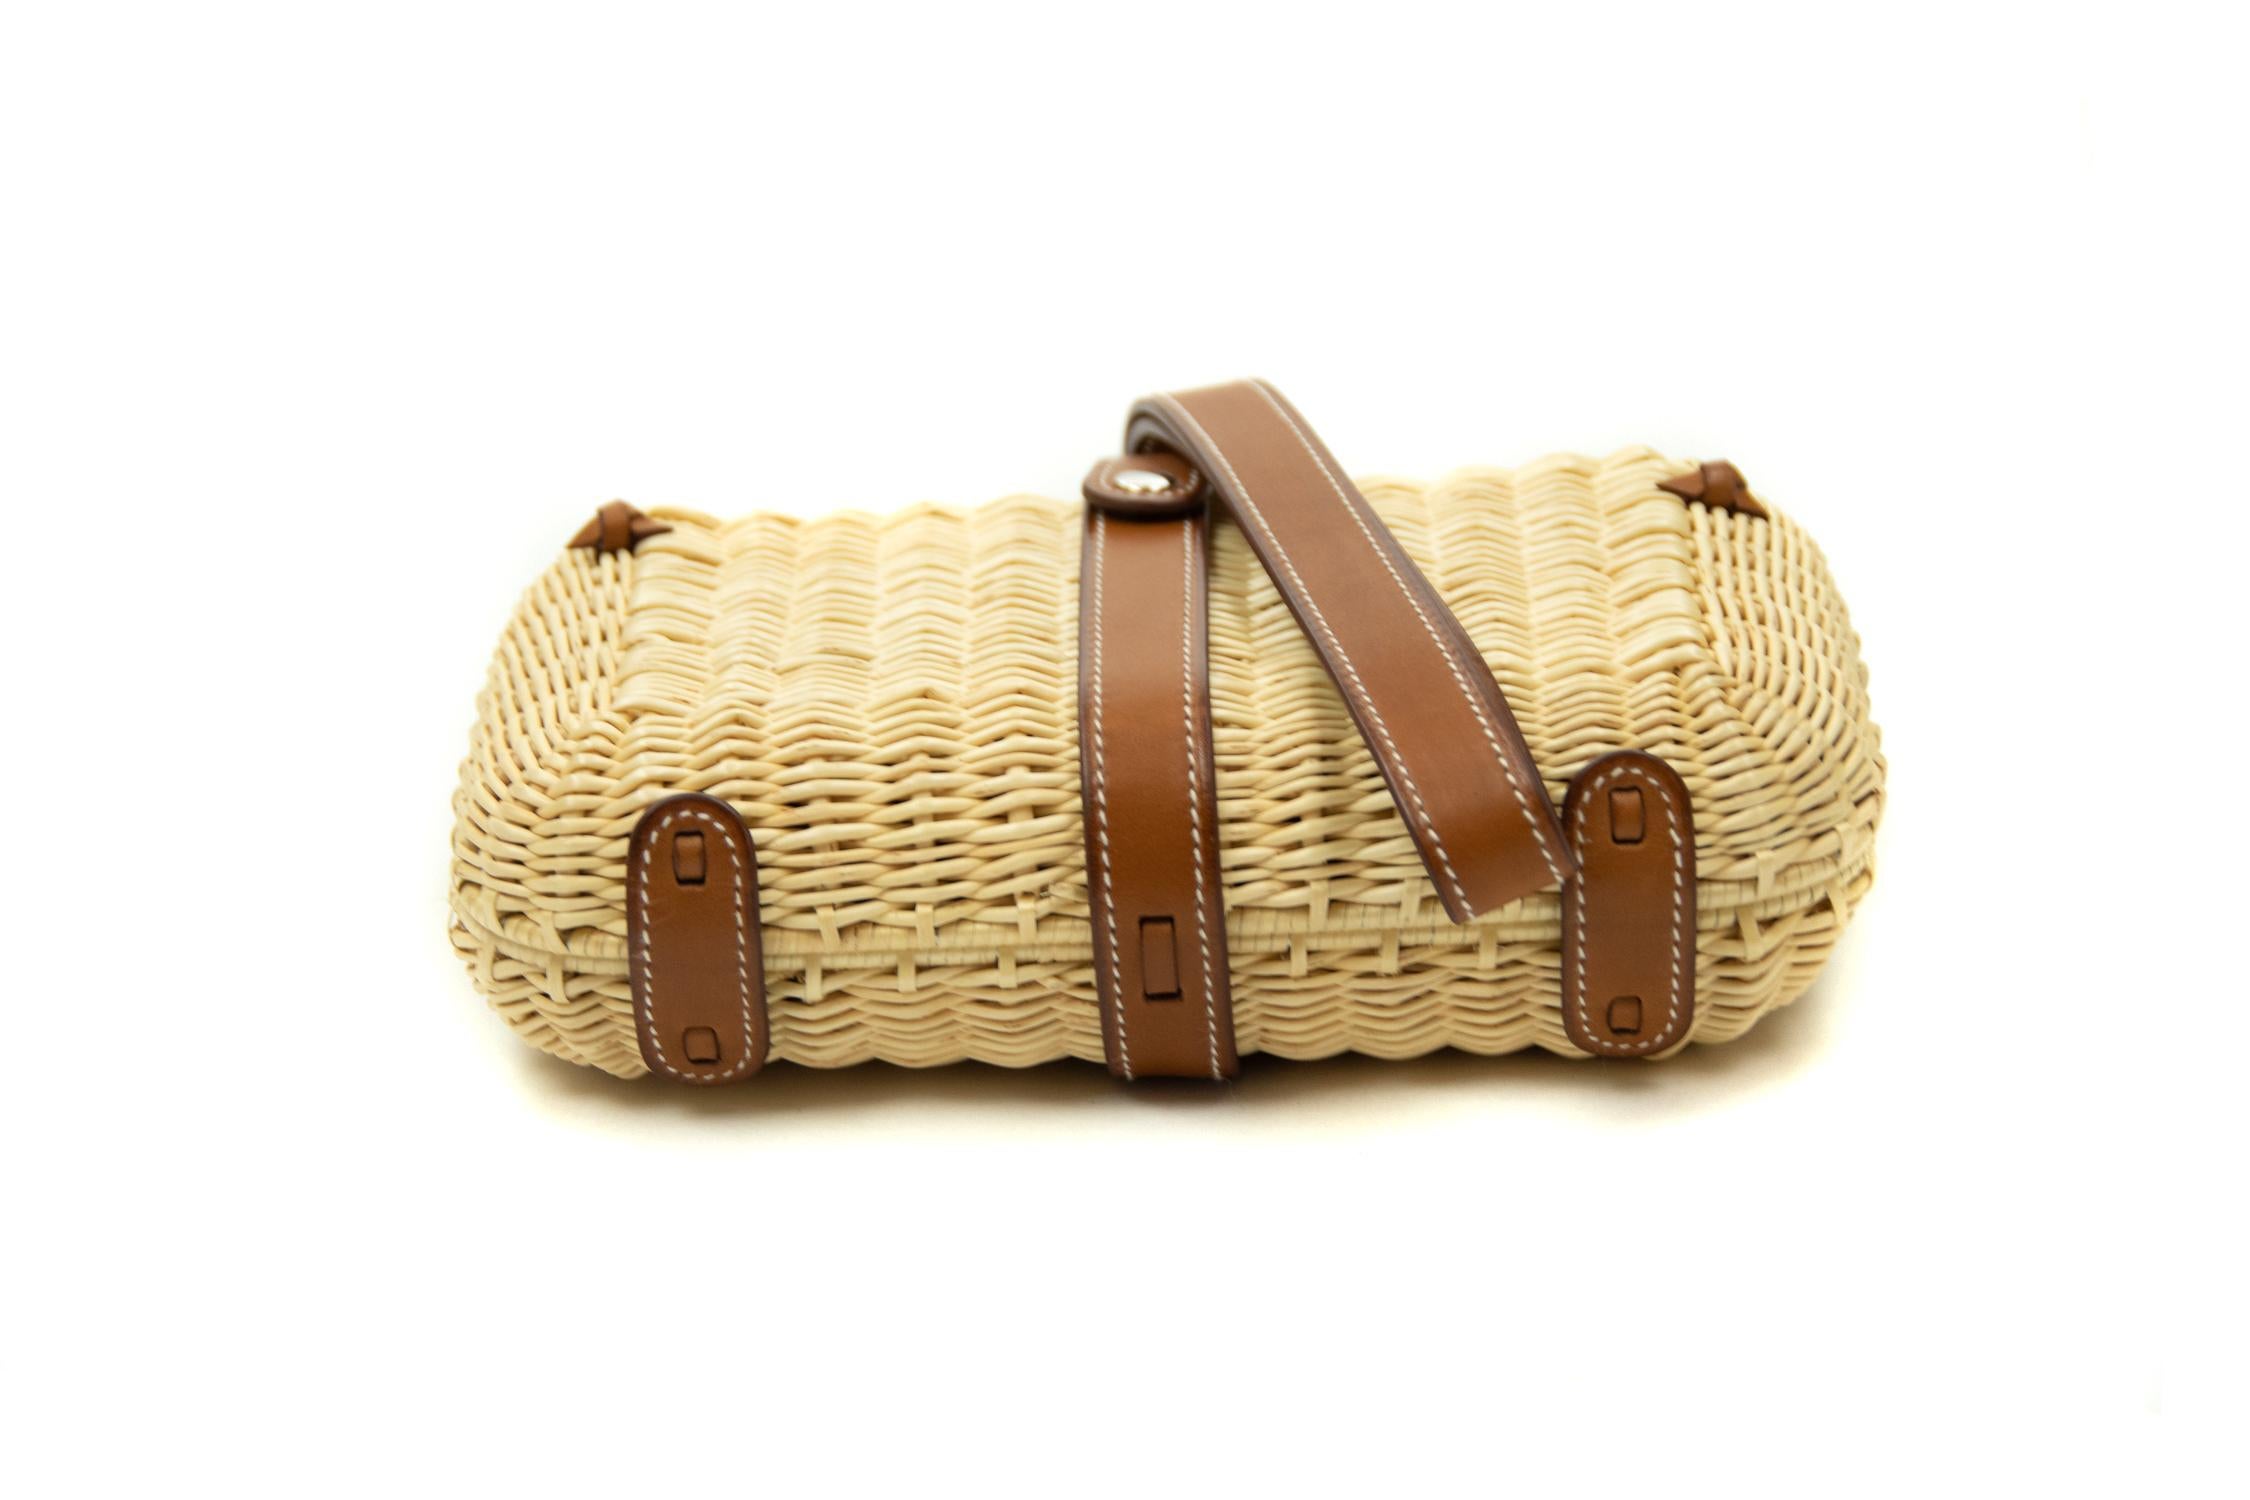 Hermes Picnic Minaudiere Wicker Clutch in Barenia Leather. This iconic special order Hermes clutch is timeless and chic. Fresh and crisp with palladium hardware.

    Condition: New or Never Used
    Made in France
    Bag Measures: 7.5